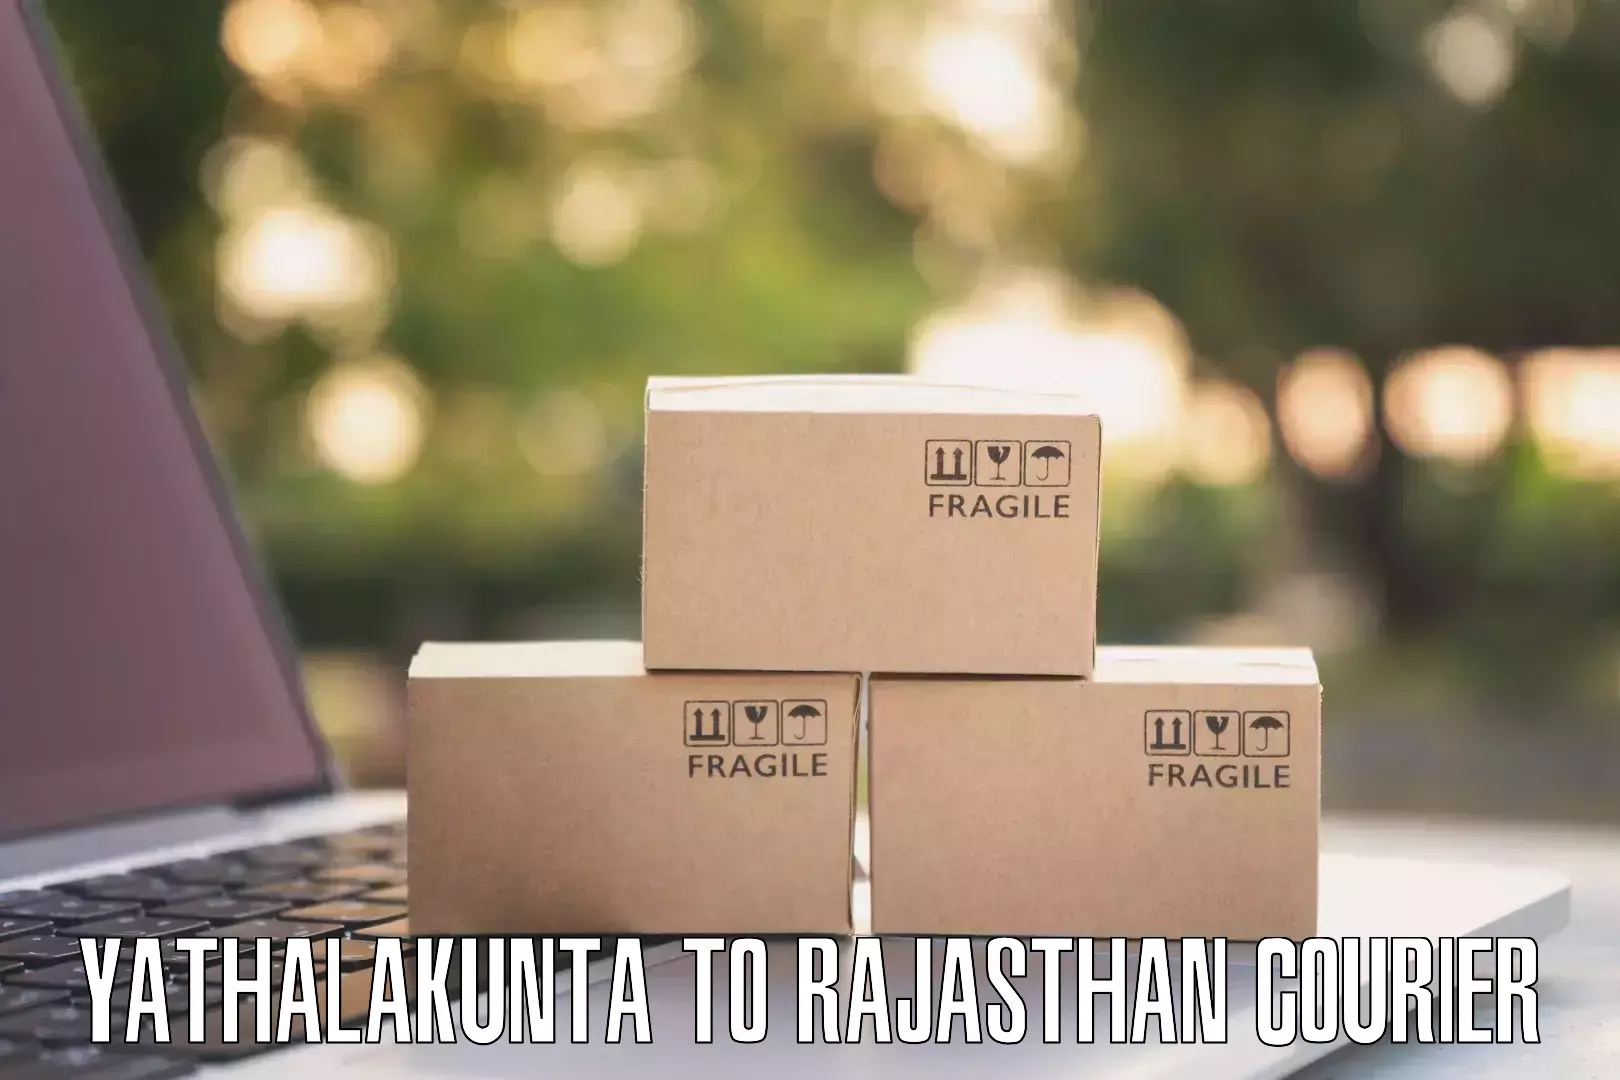 Reliable delivery network Yathalakunta to Yeswanthapur